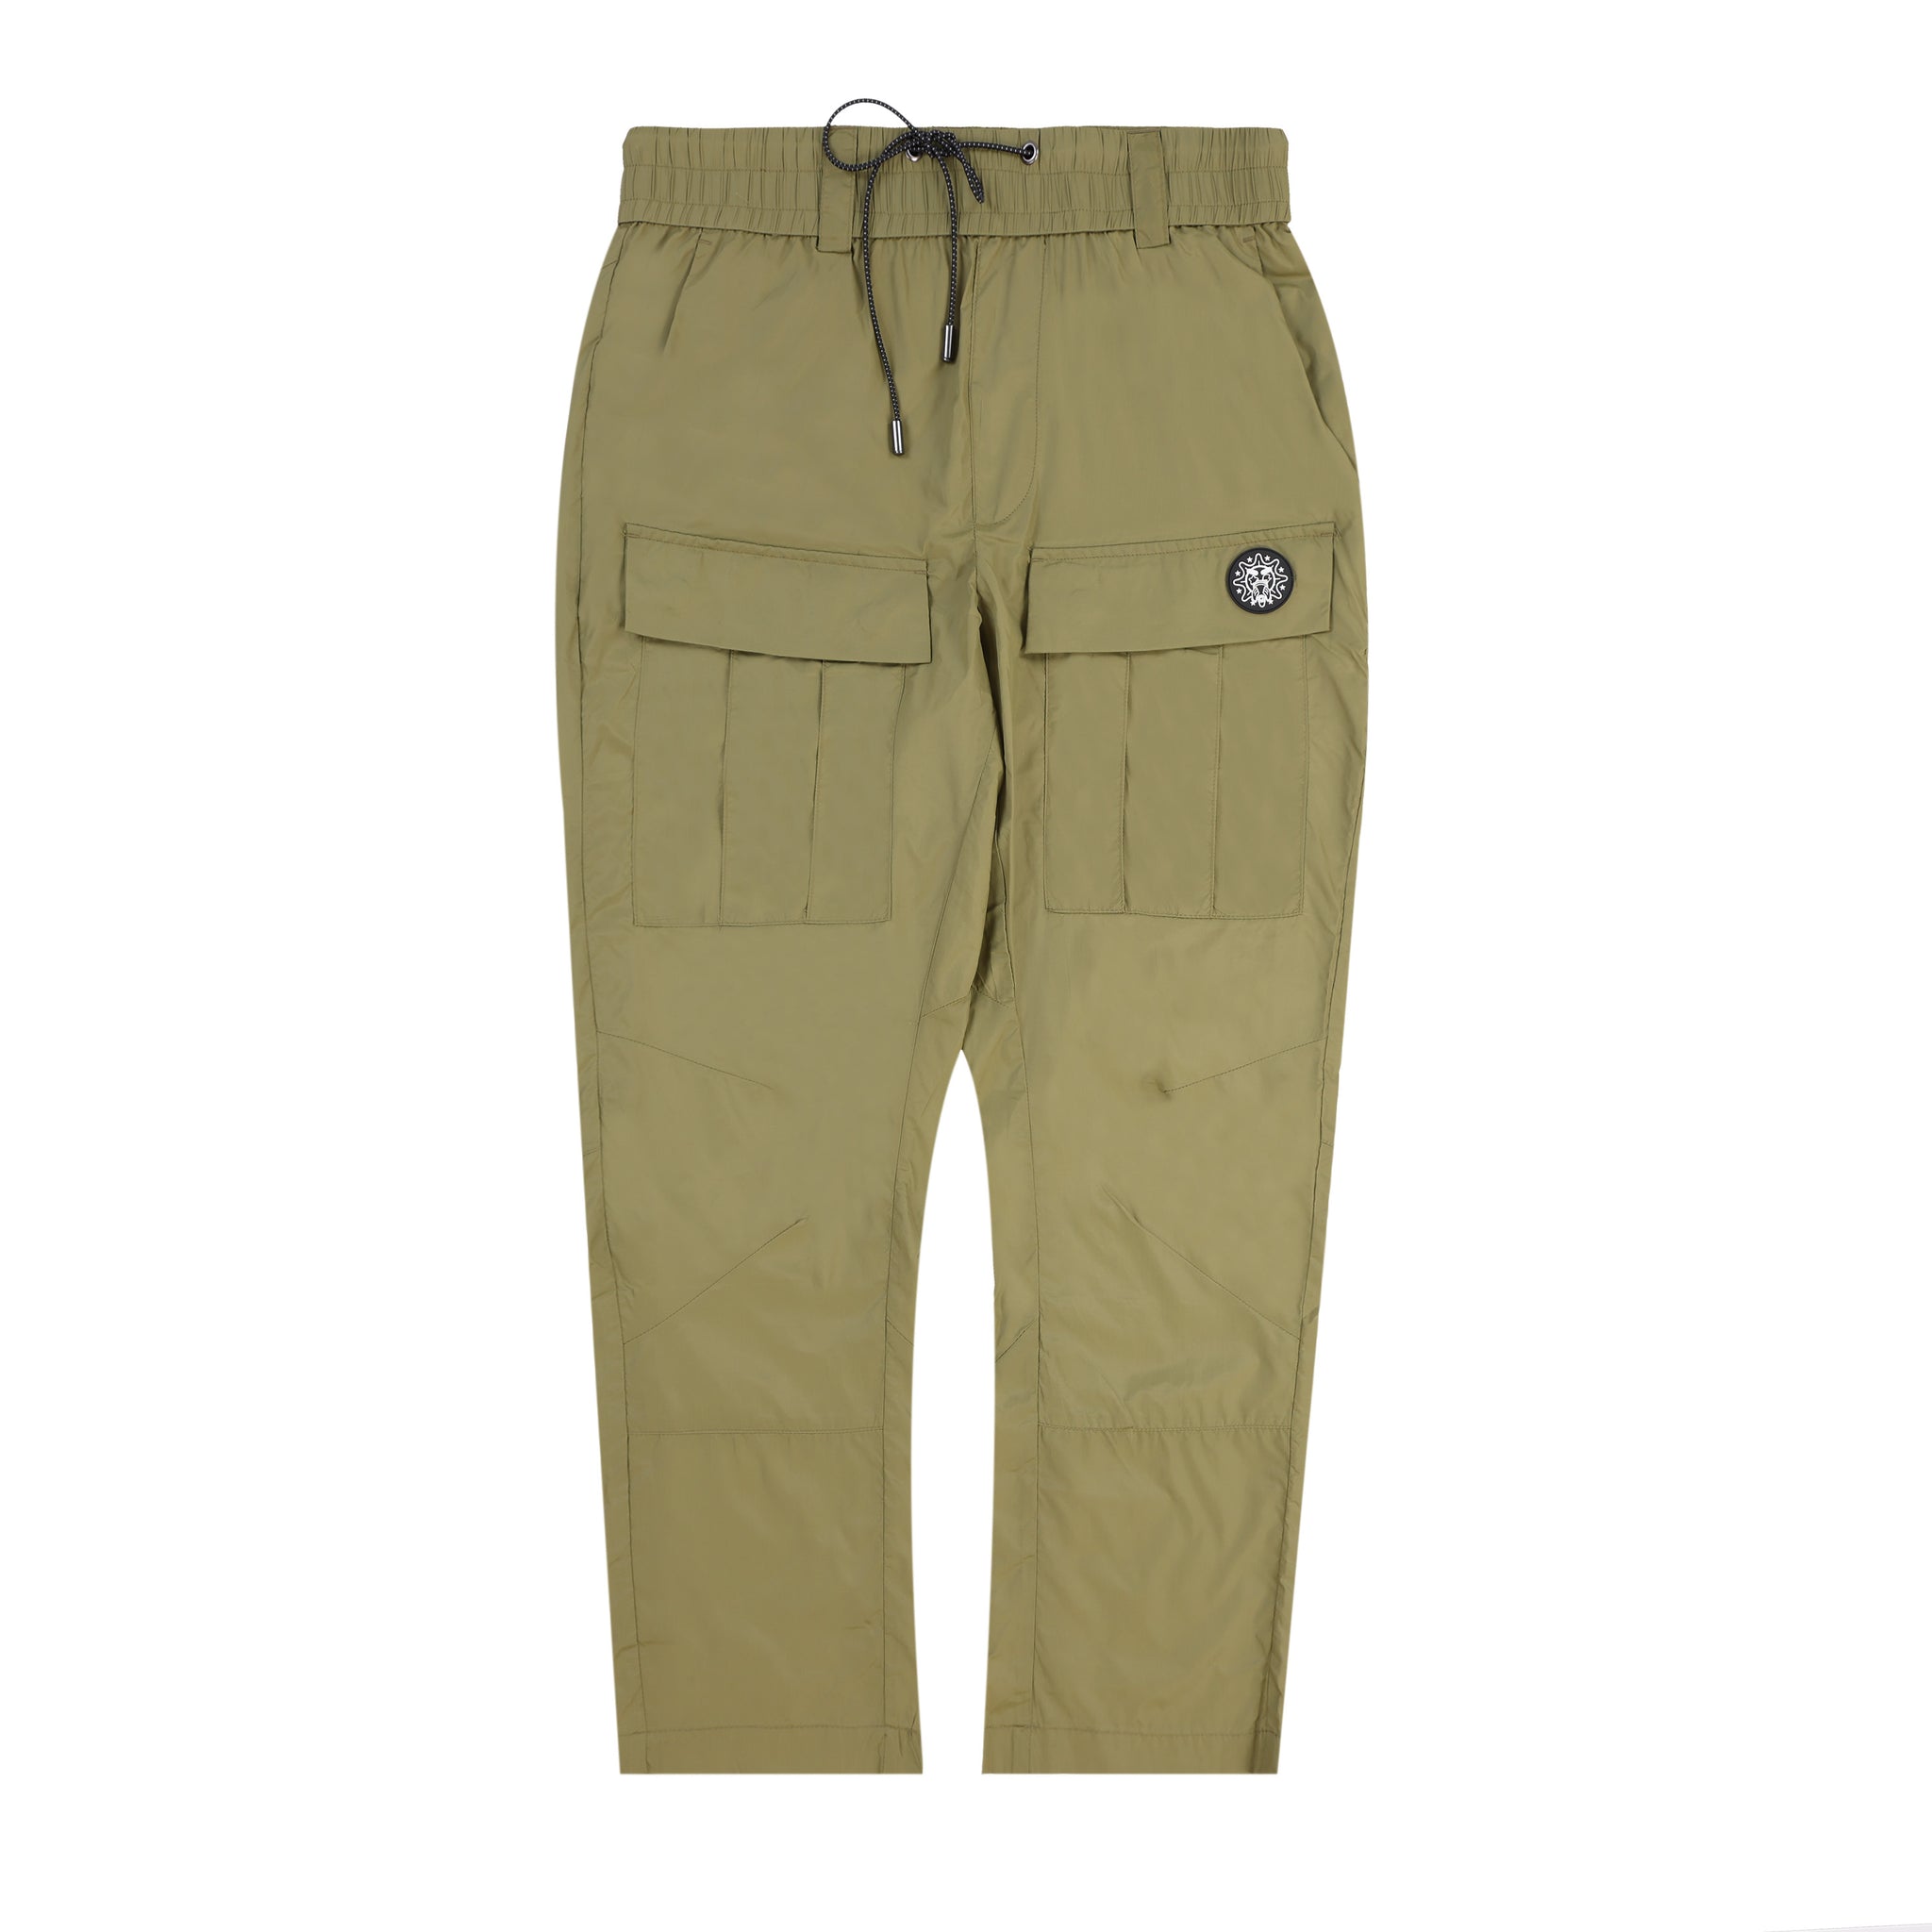 Glo Gang Bungee Track Pant (Olive)